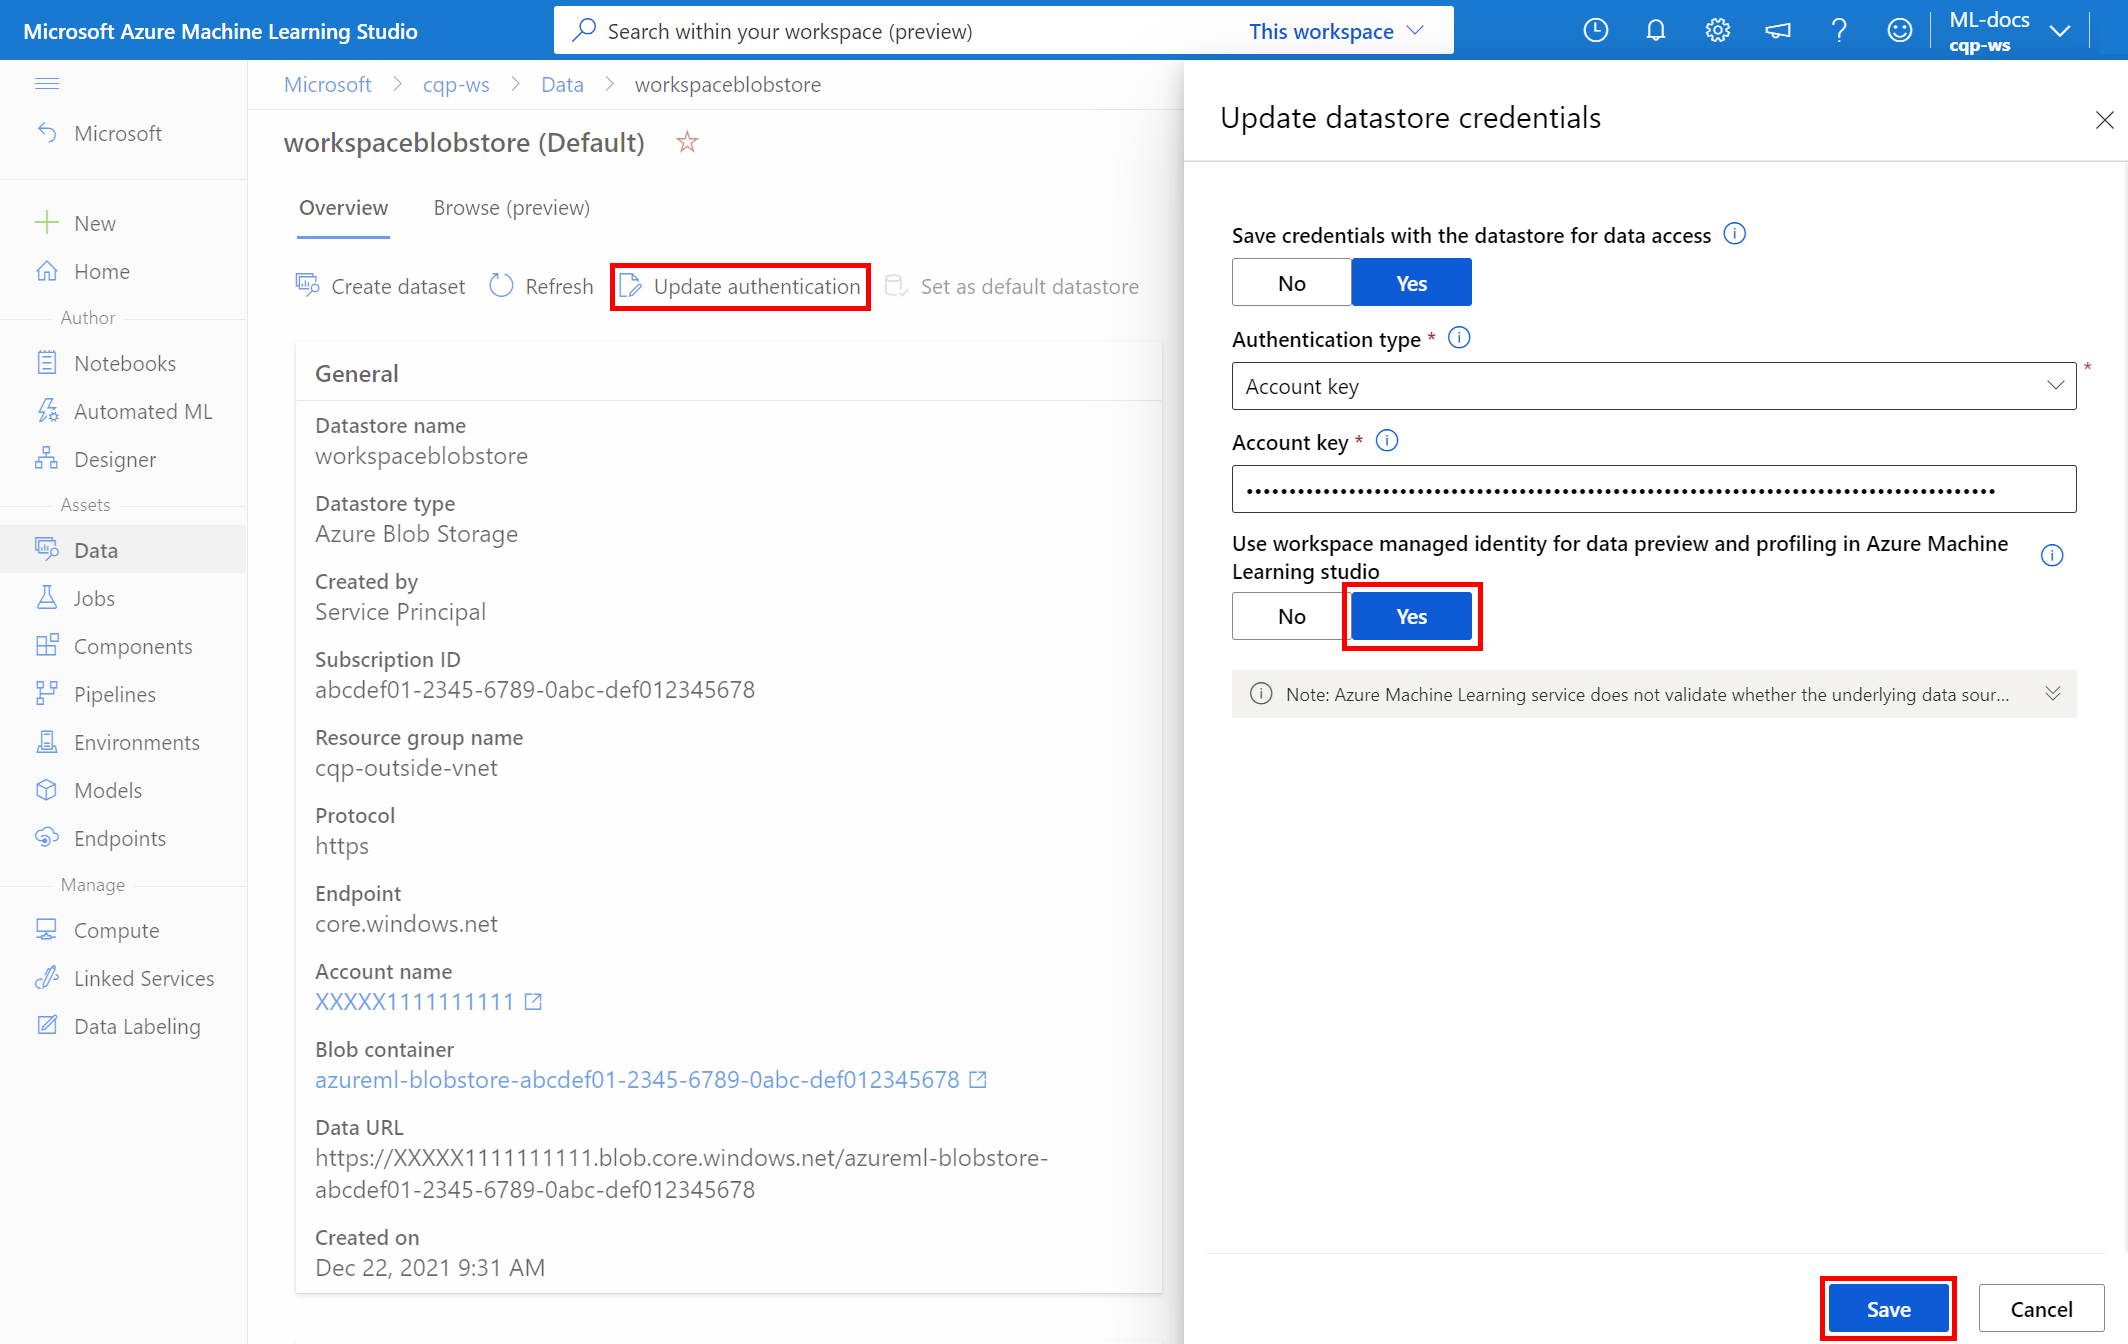 Screenshot showing how to enable managed workspace identity